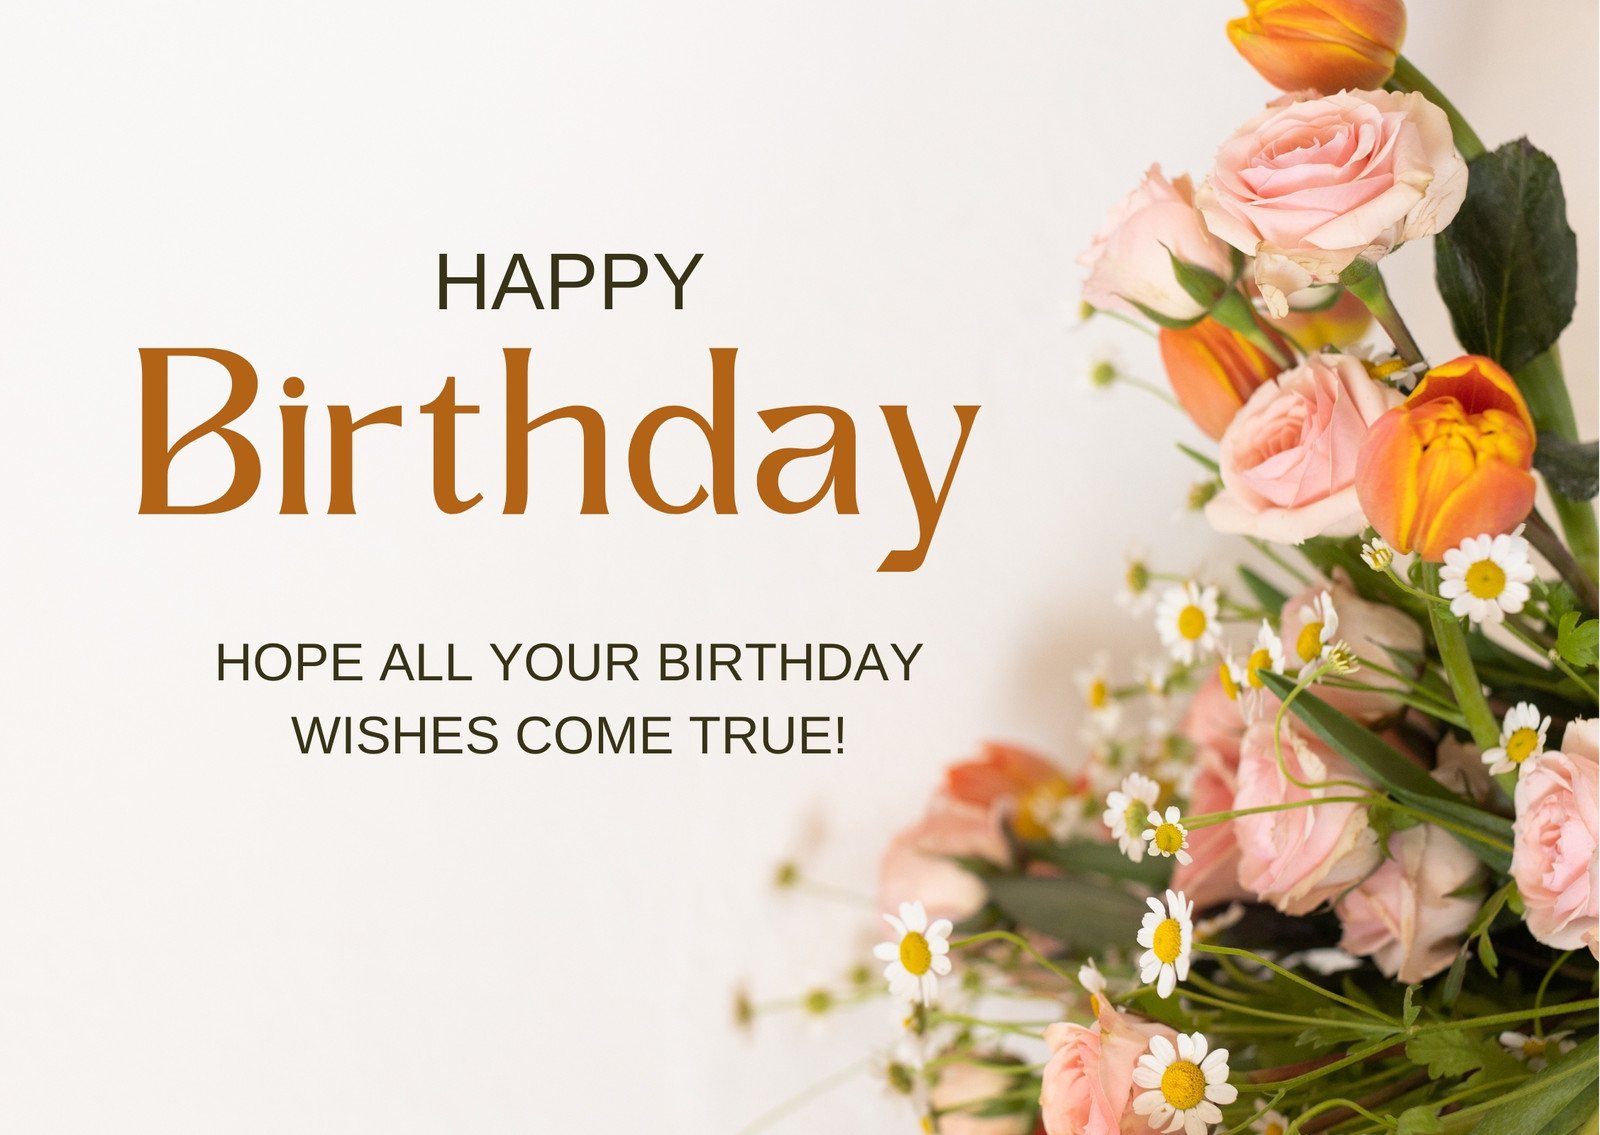 A Stunning Assortment of Over 999 Birthday Greetings Images in Full 4K Quality